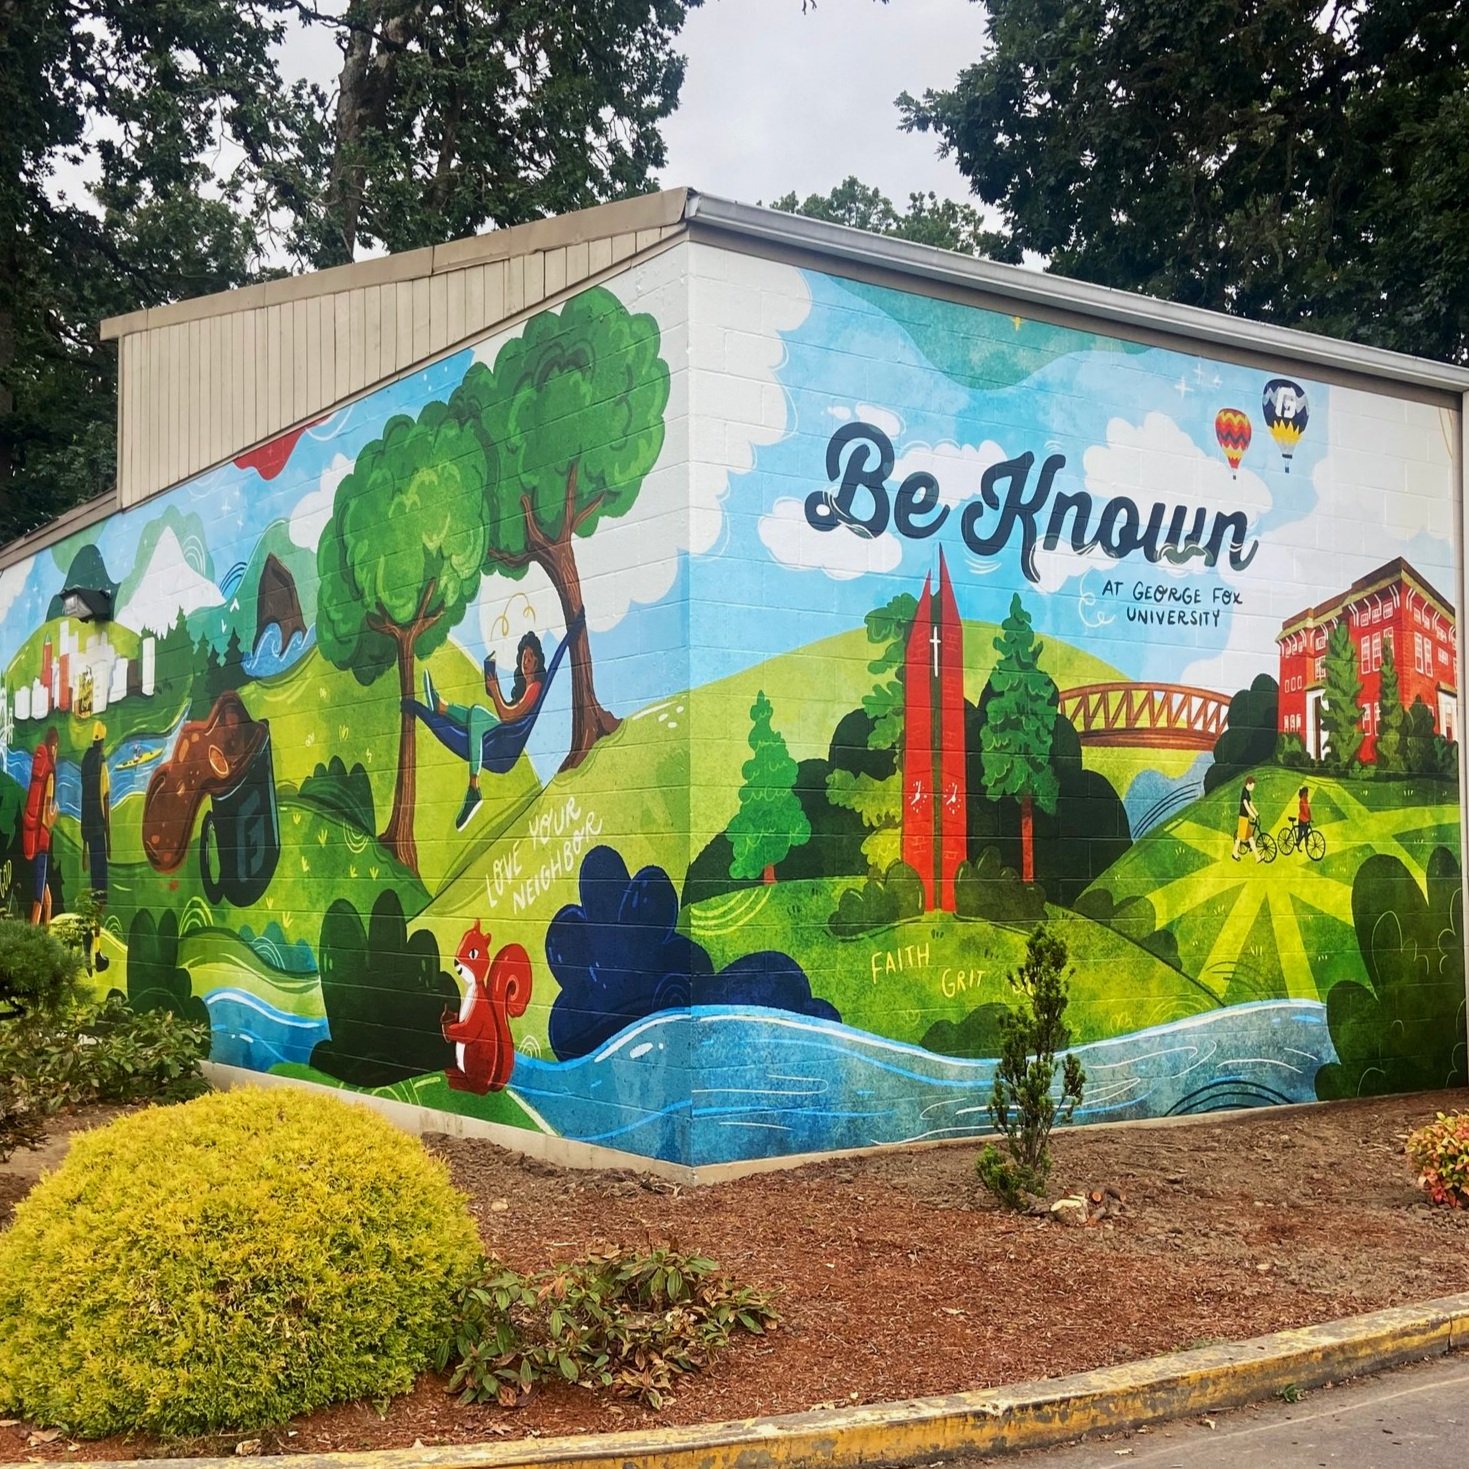 The Be Known Mural